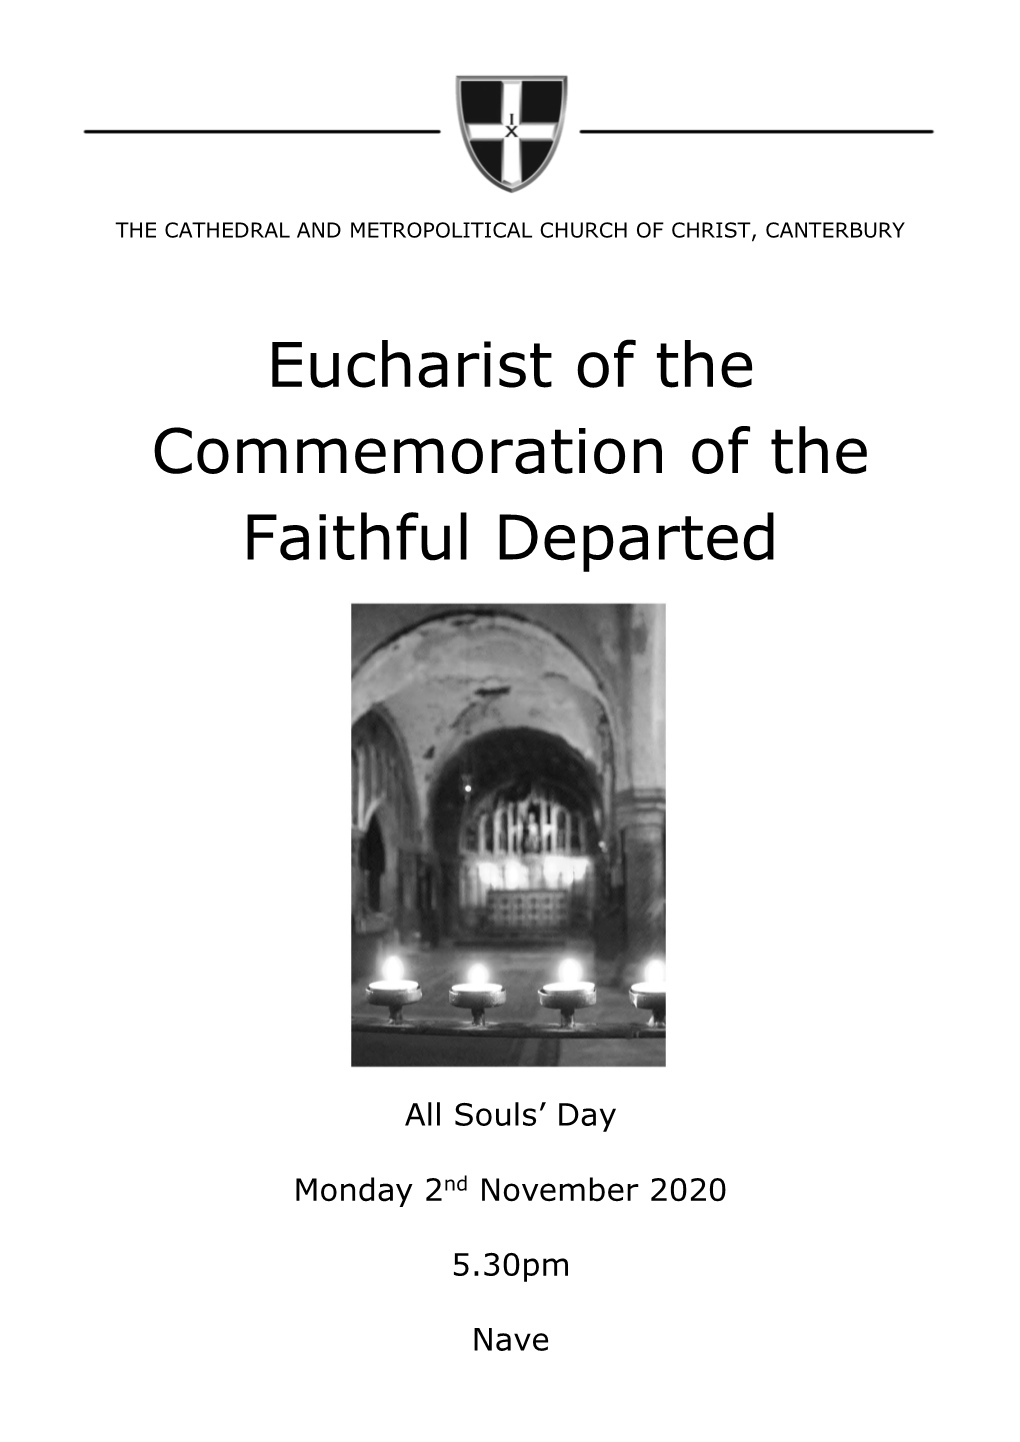 Eucharist of the Commemoration of the Faithful Departed